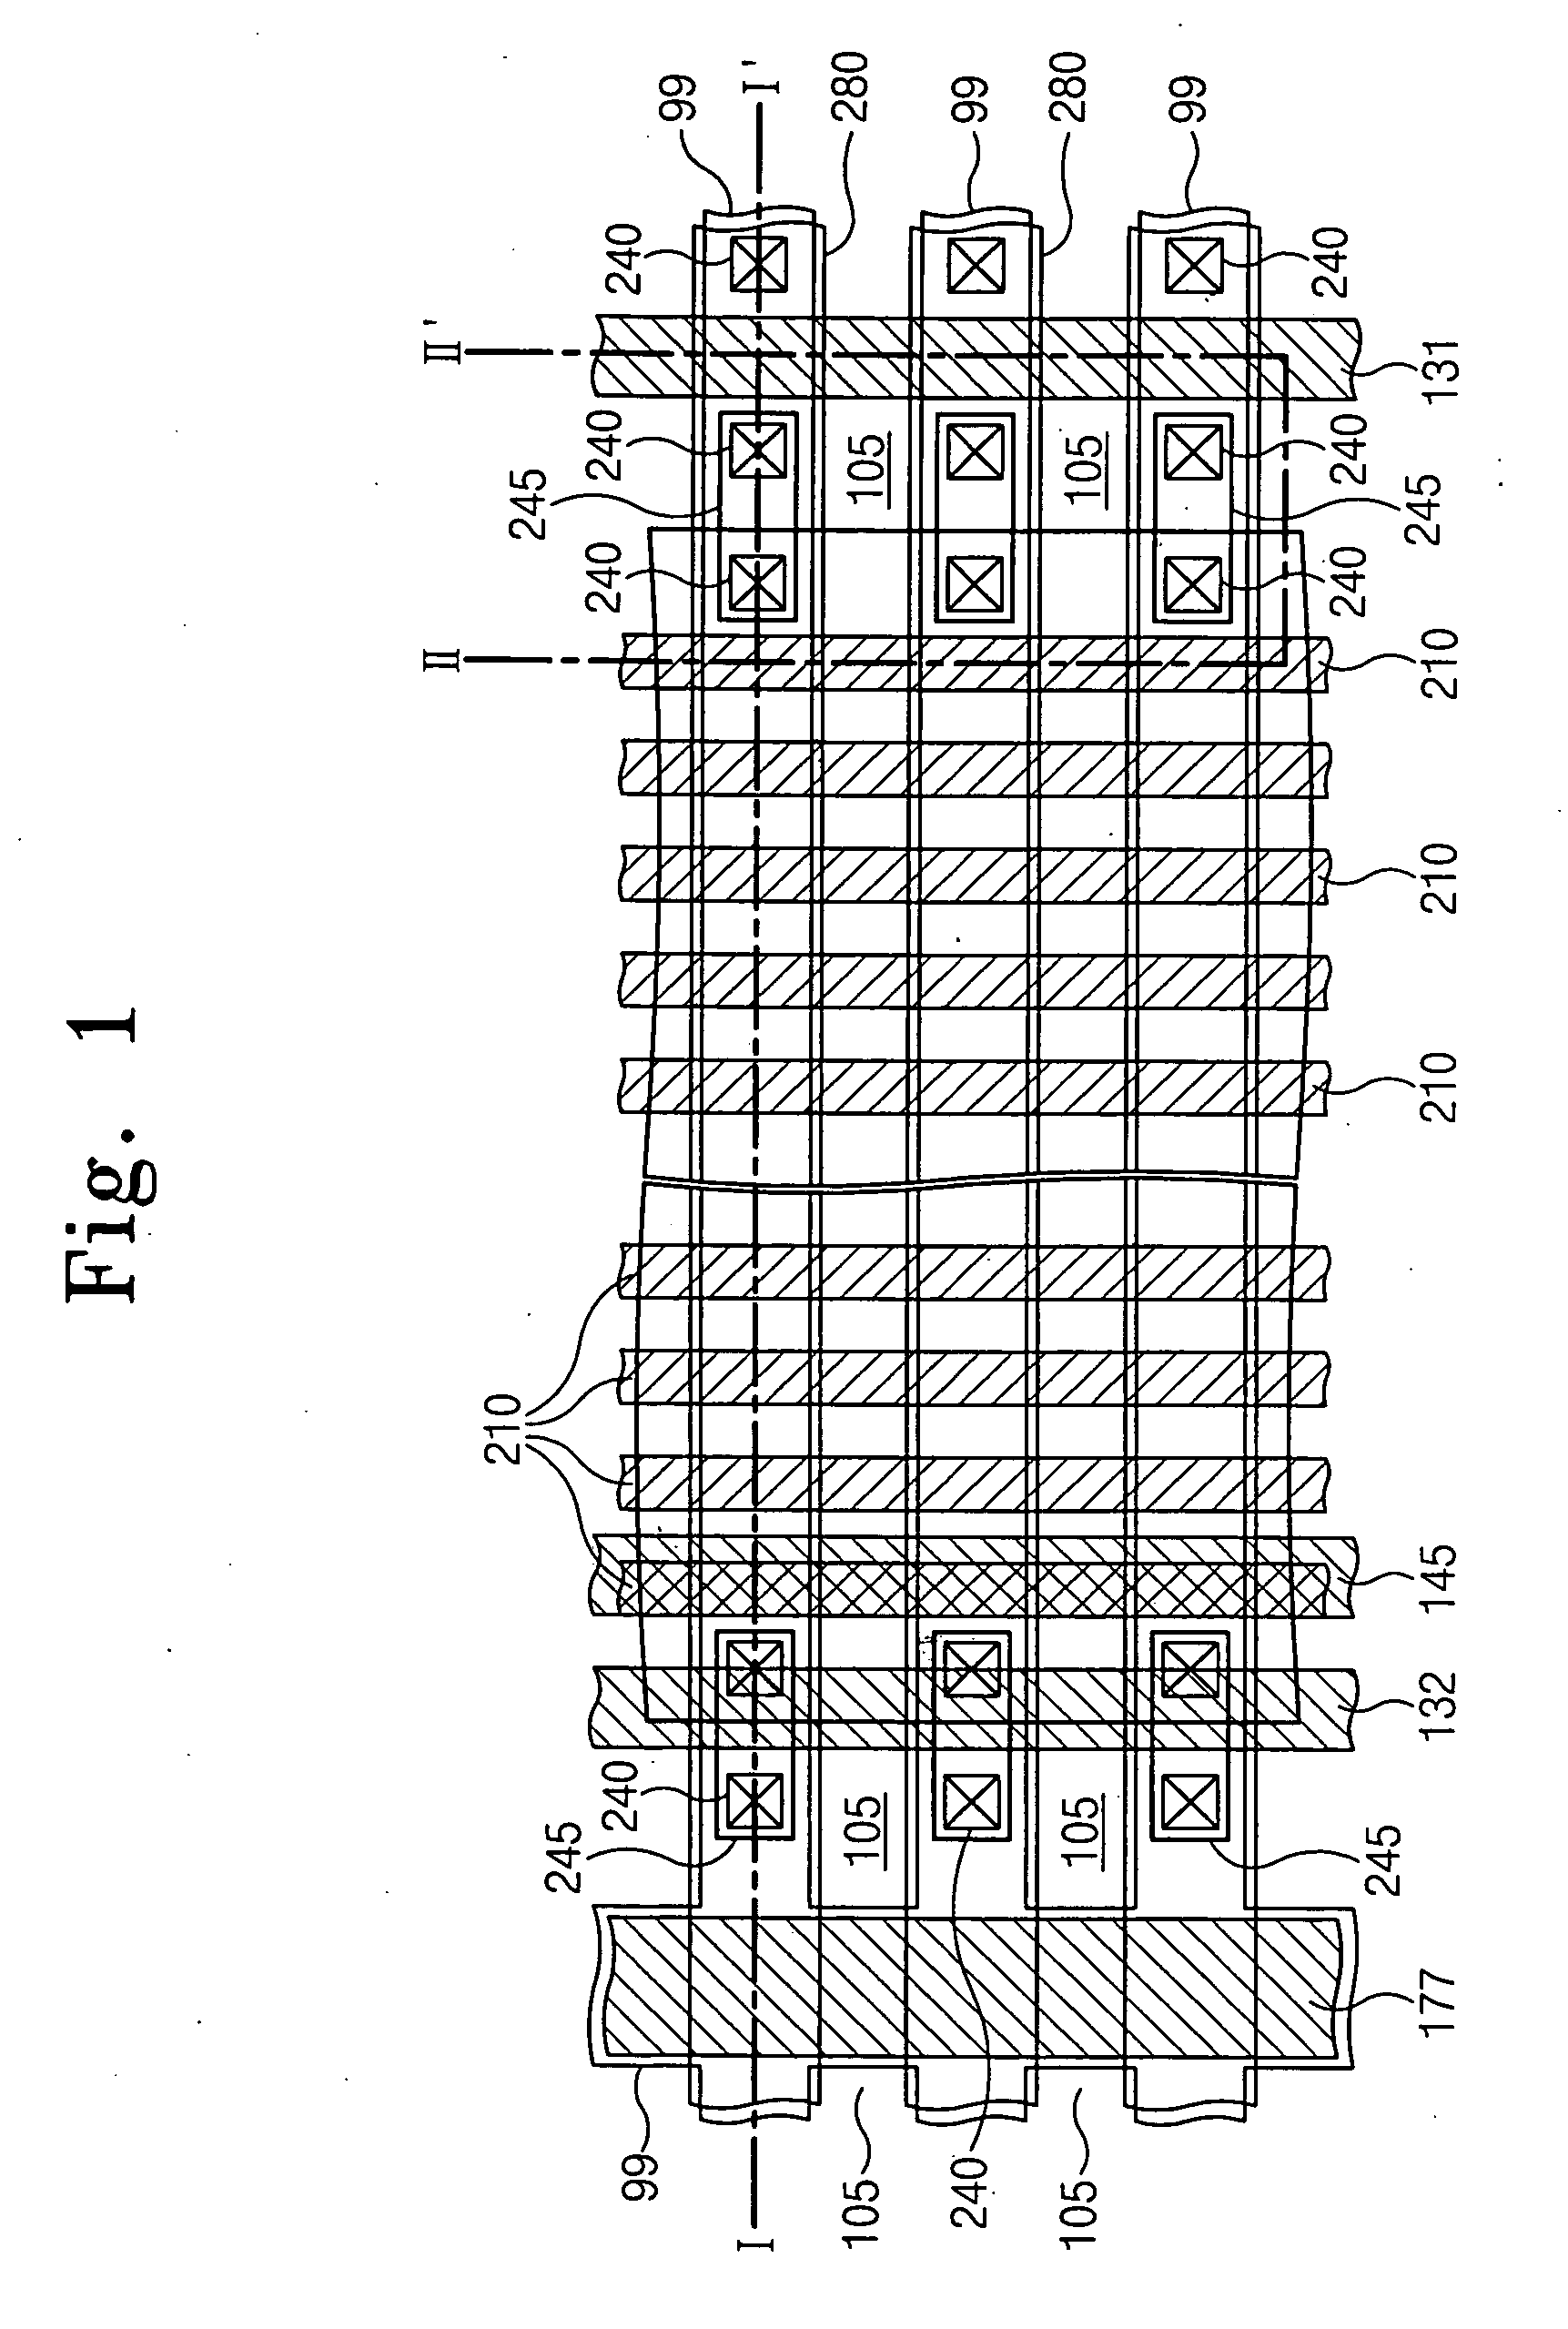 NAND flash memory devices including multi-layer memory cell transistor structures and methods of fabricating the same